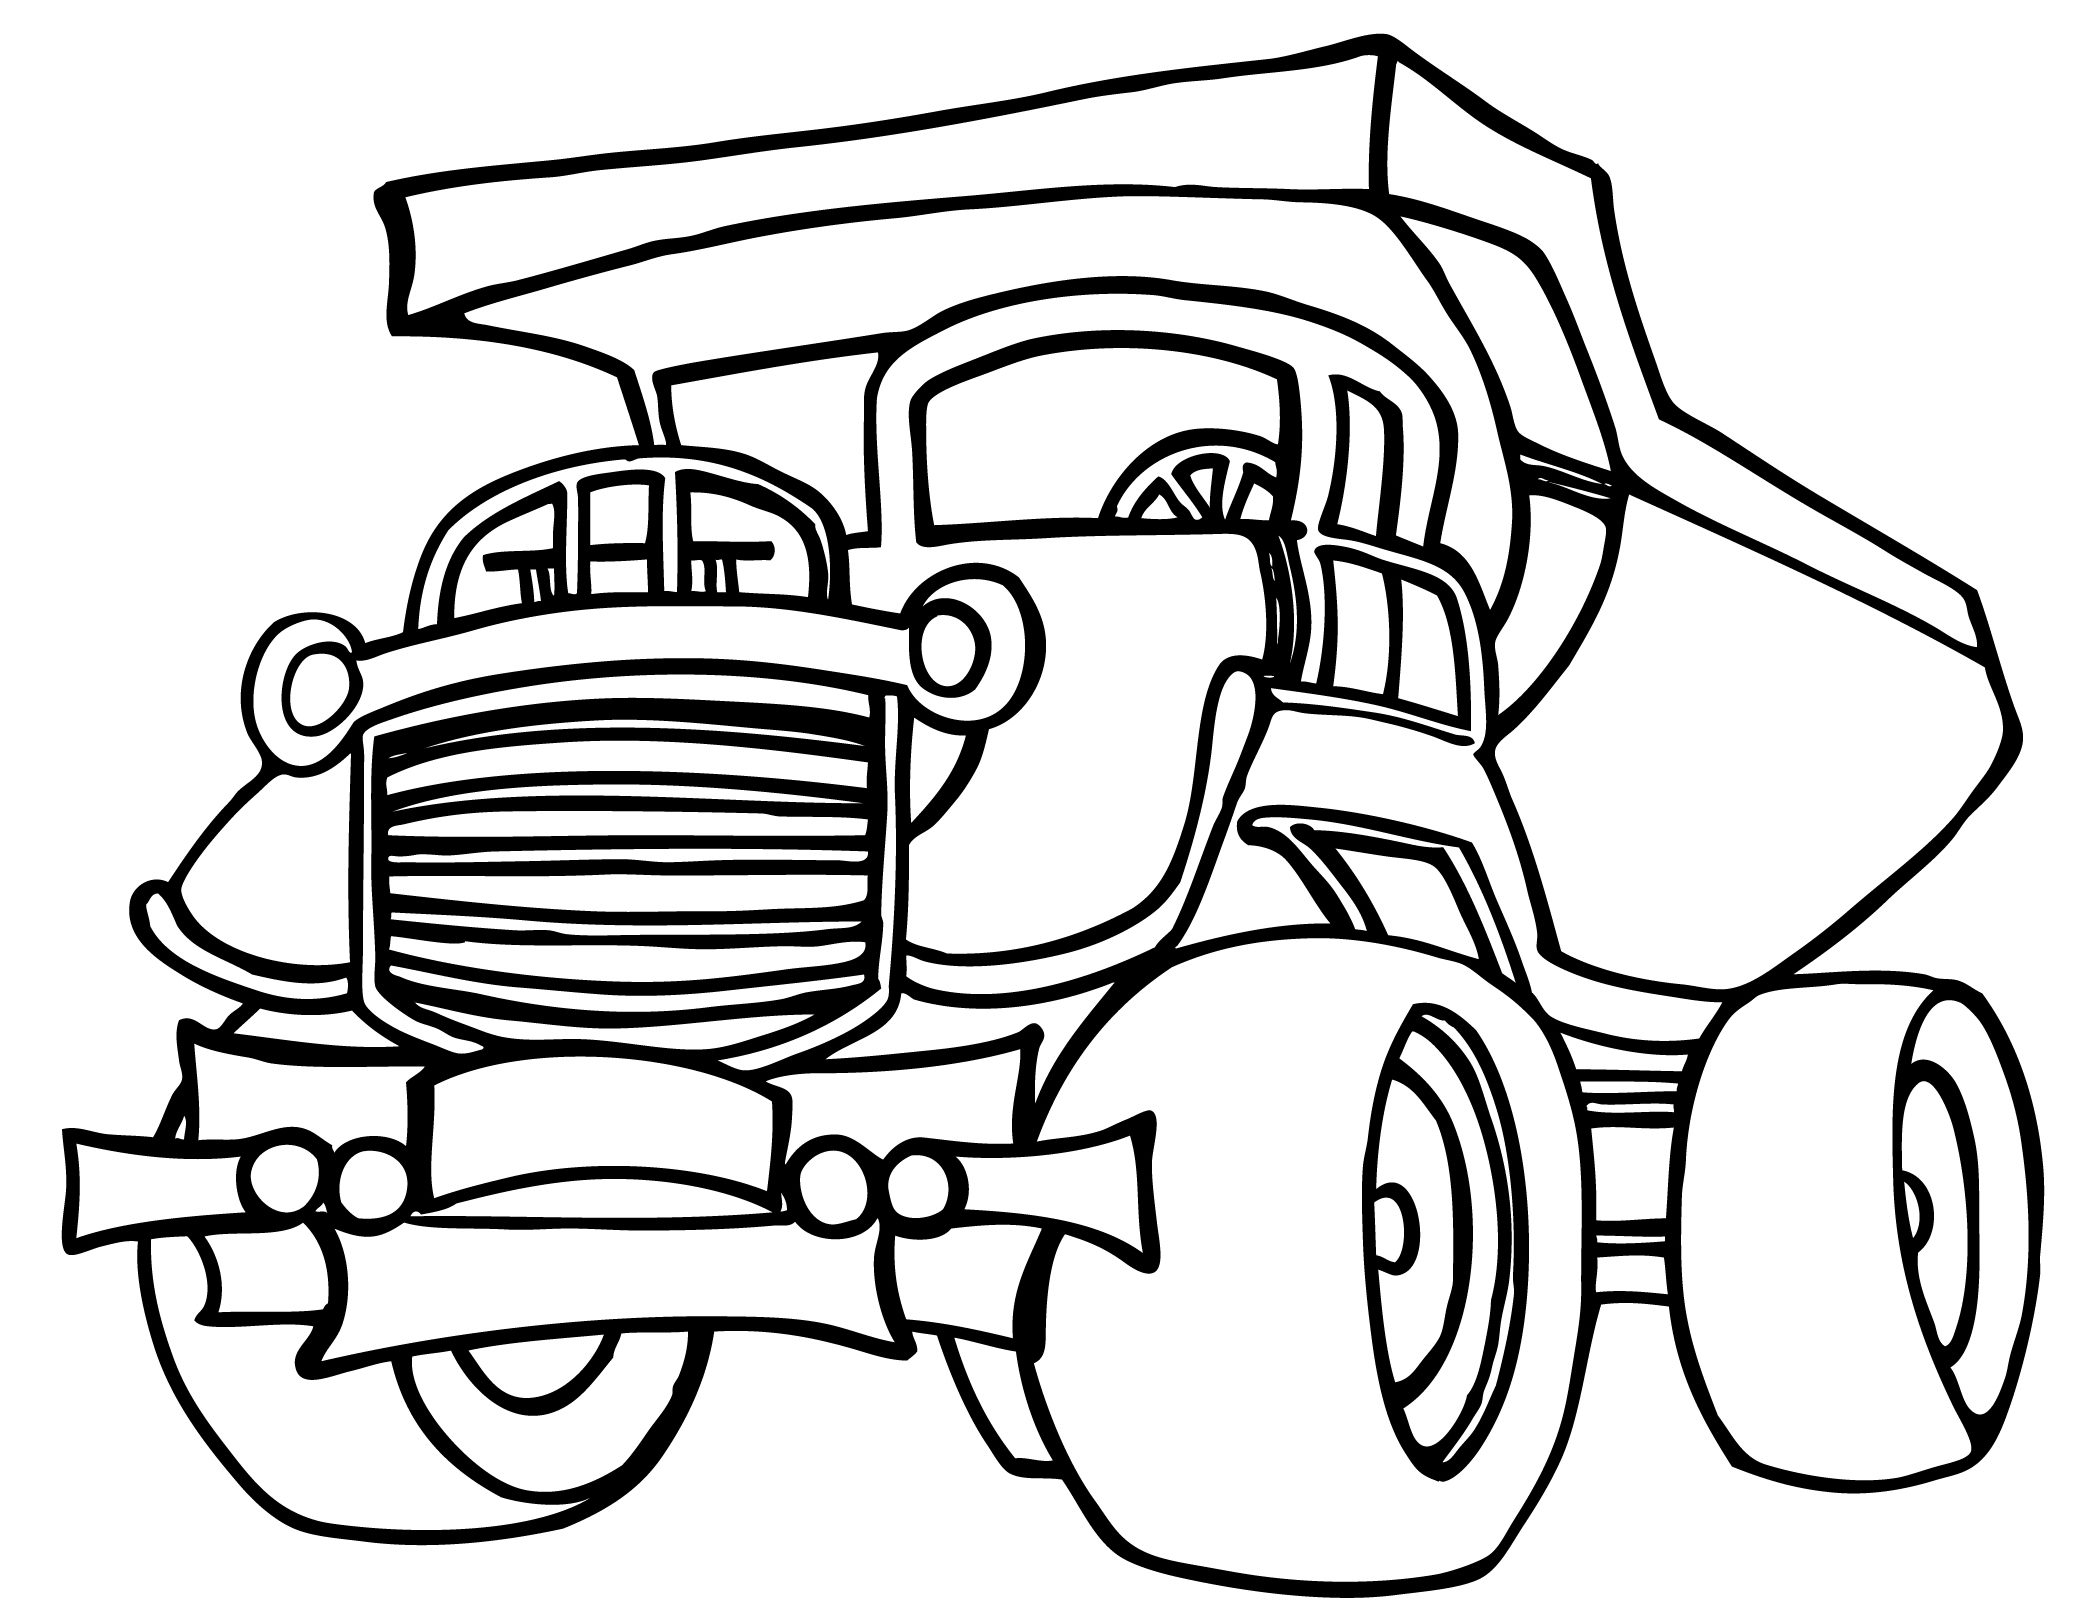 Compressing Garbage Truck On Dump Truck Coloring Page: Trash Truck ...